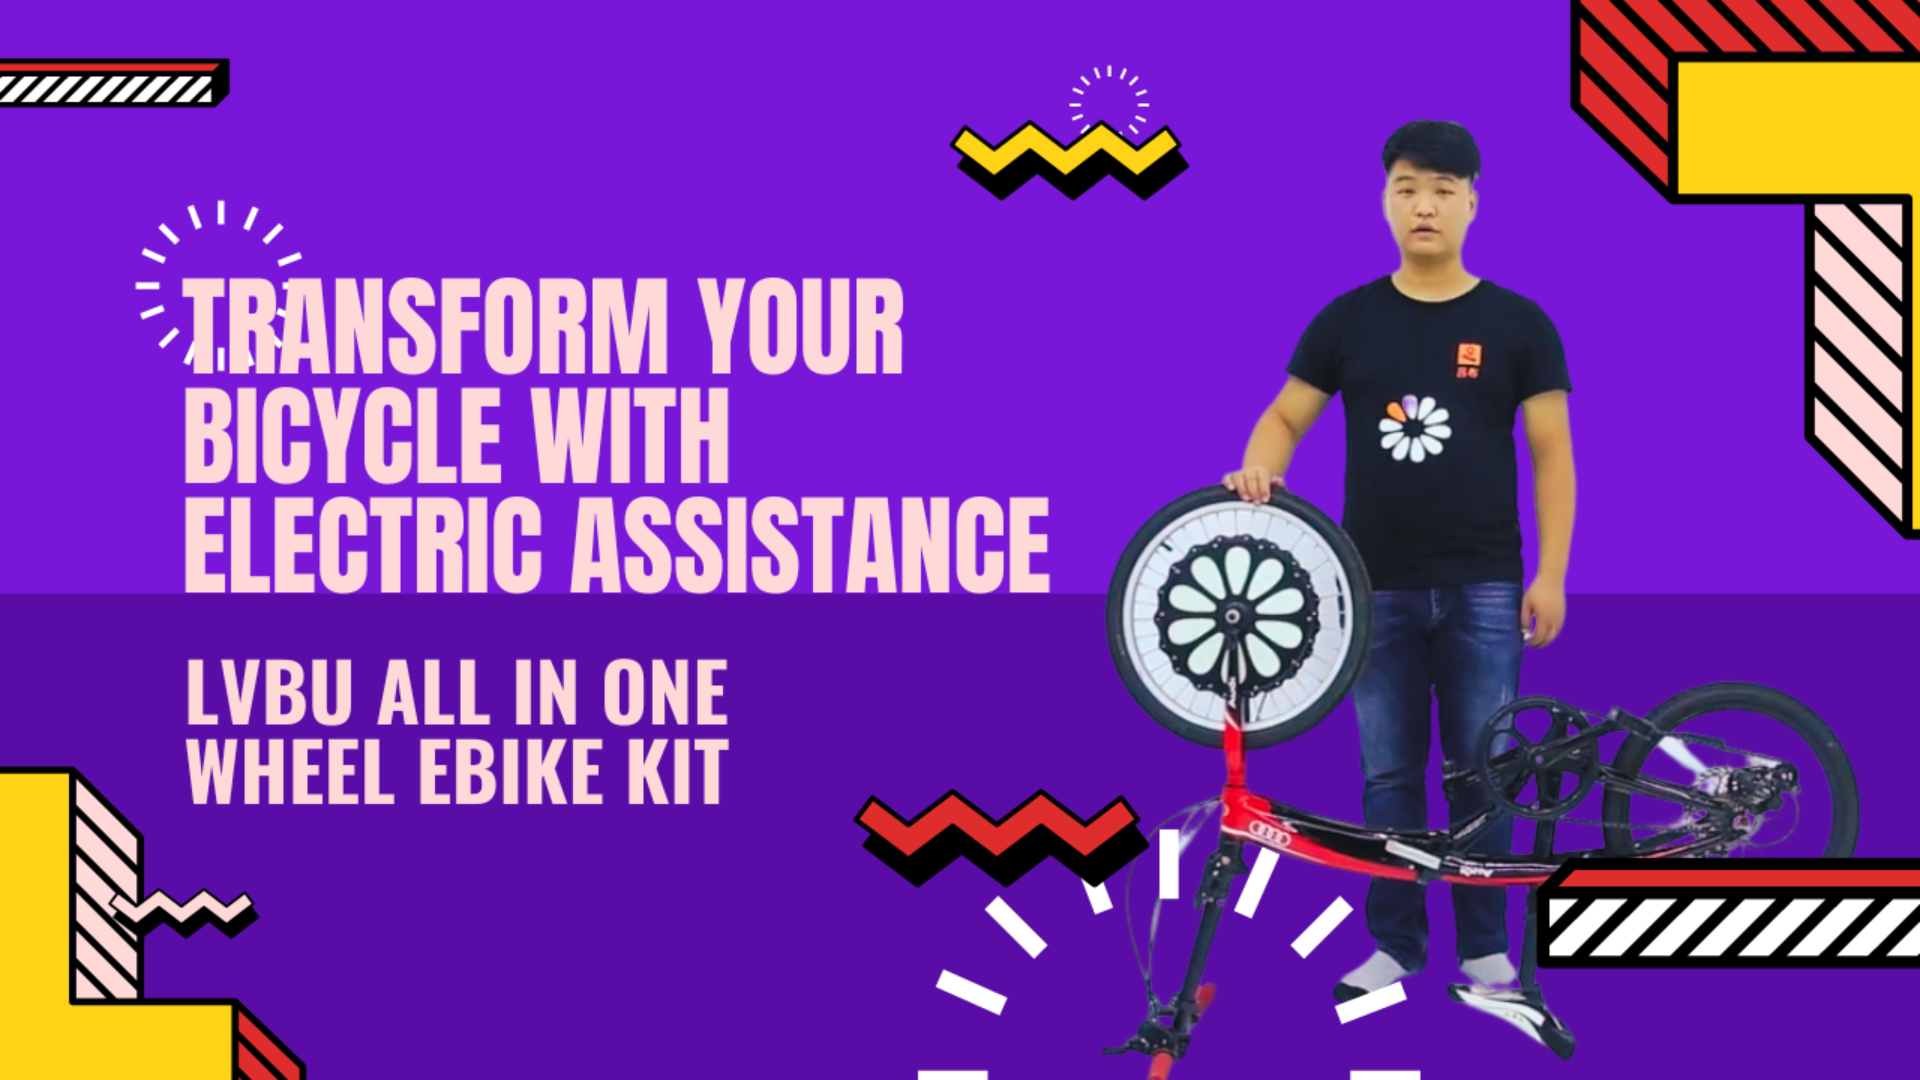 ALL-IN-ONE Ebike kit ‖ Transform your bike with electric assistance!!